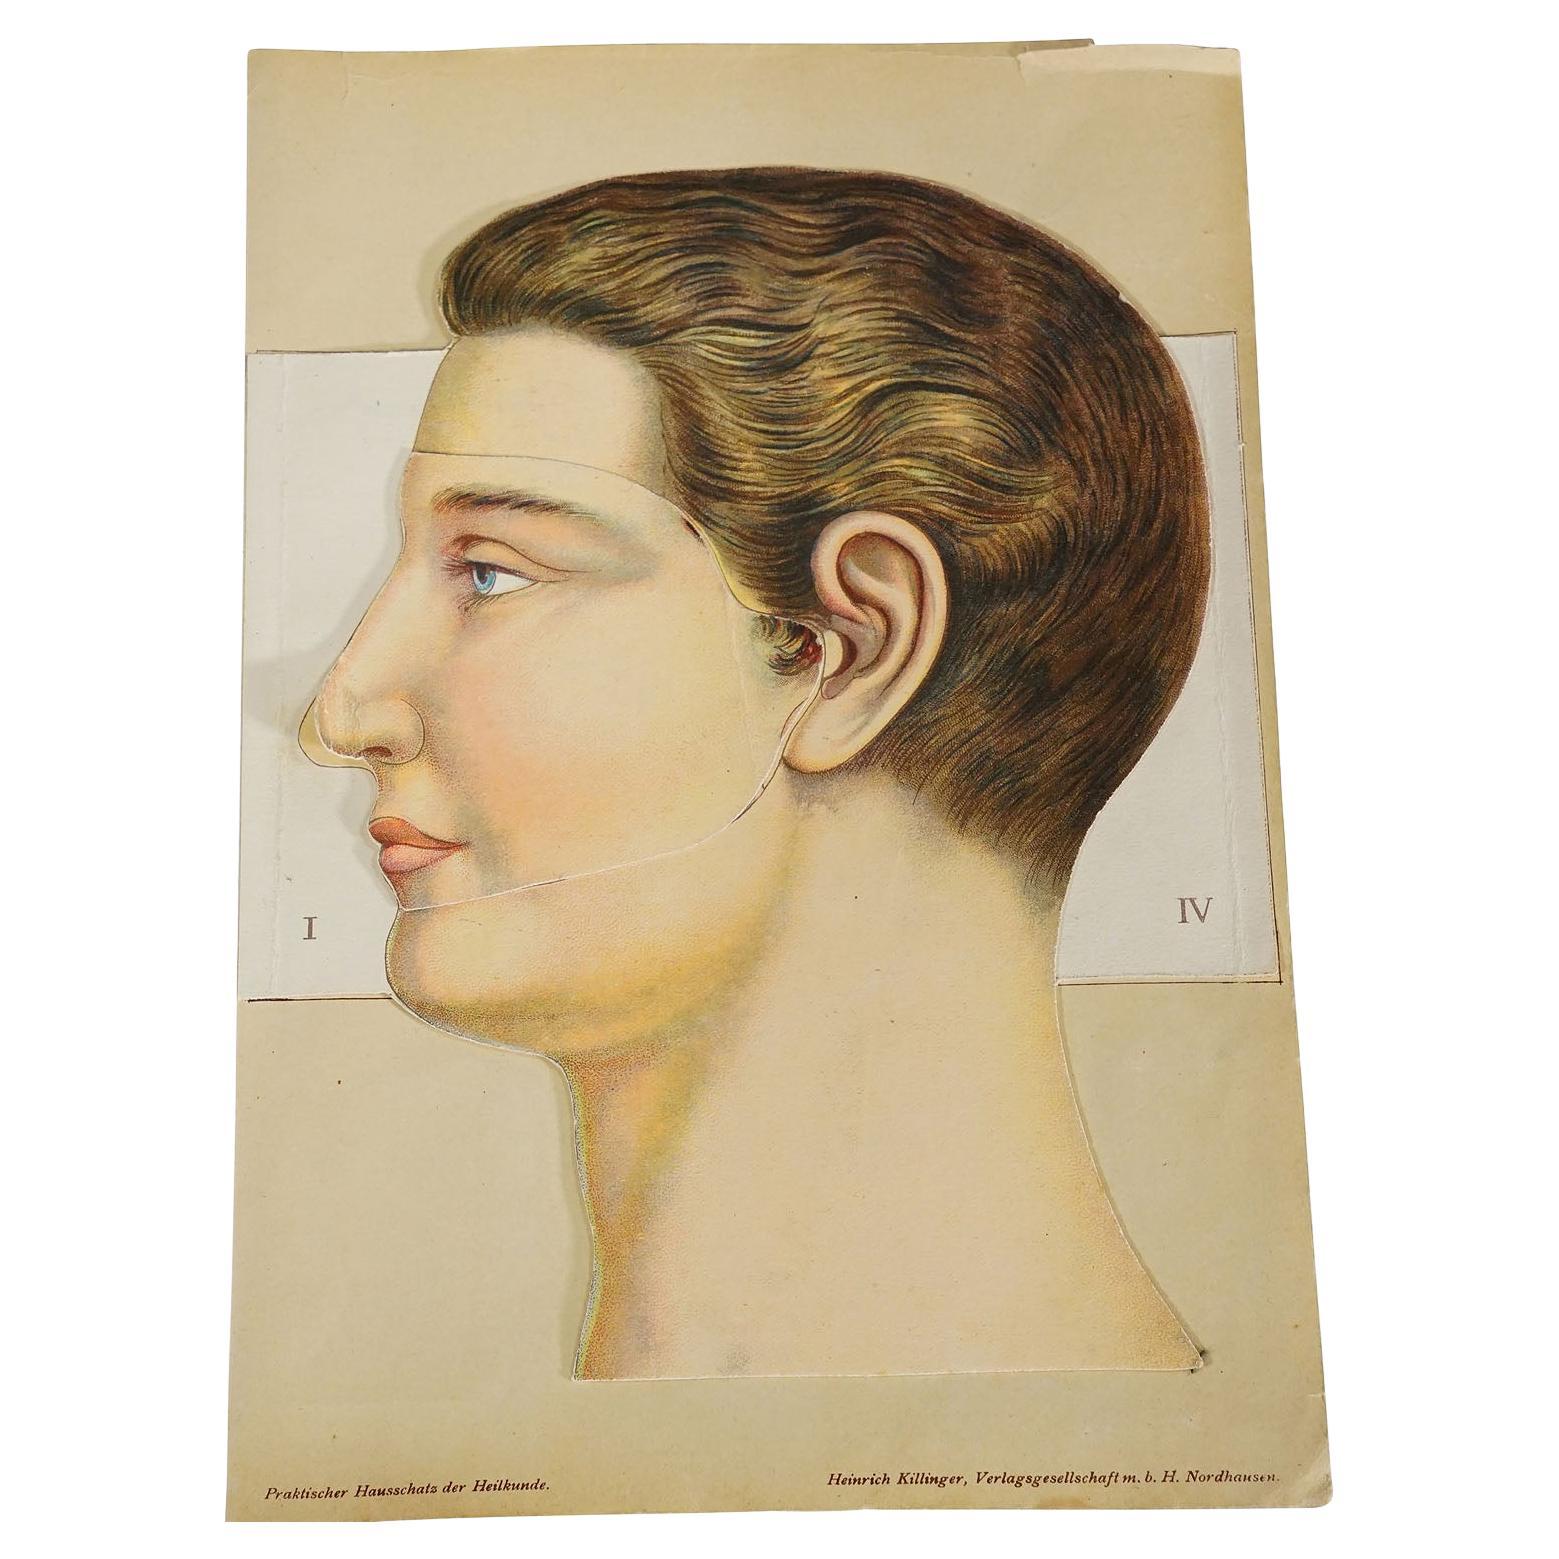 1900s Foldable Anatomical Brochure Depicting the Human Head